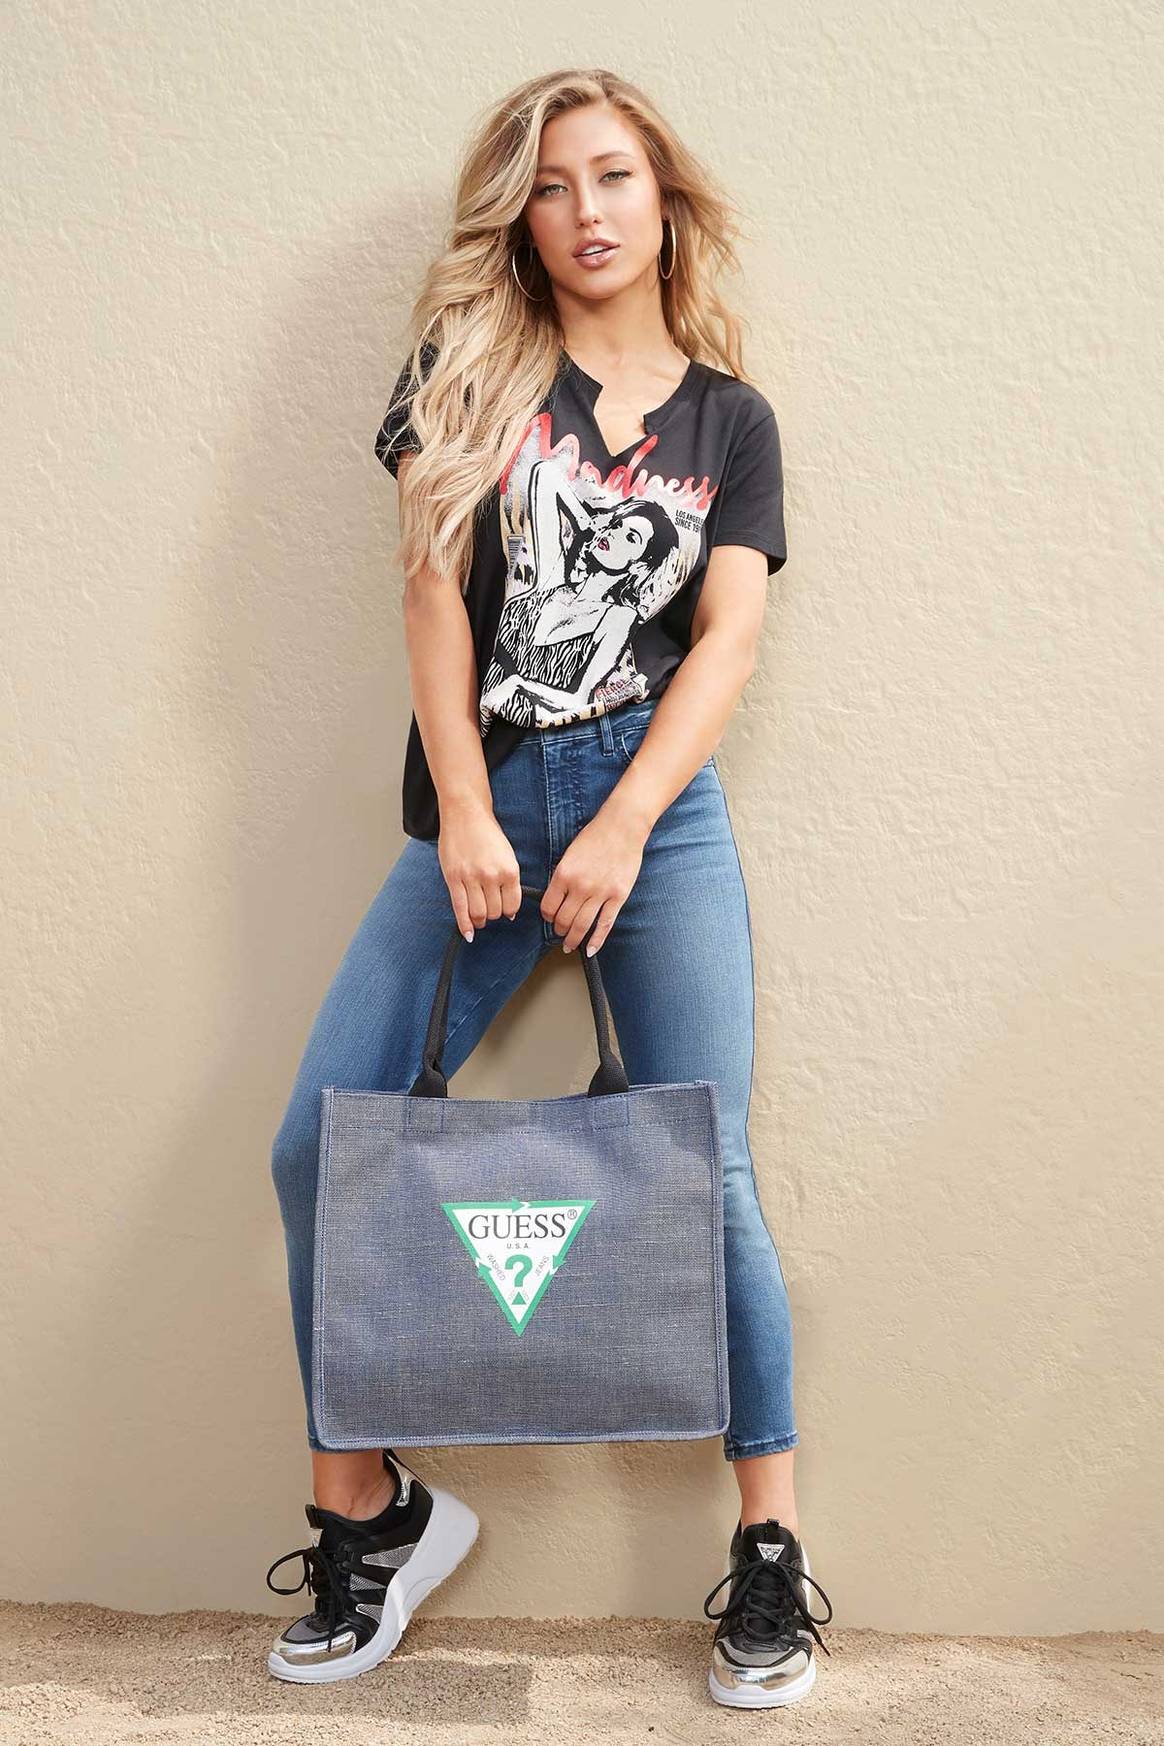 Guess introduces sustainability initiative with Guess Eco collection